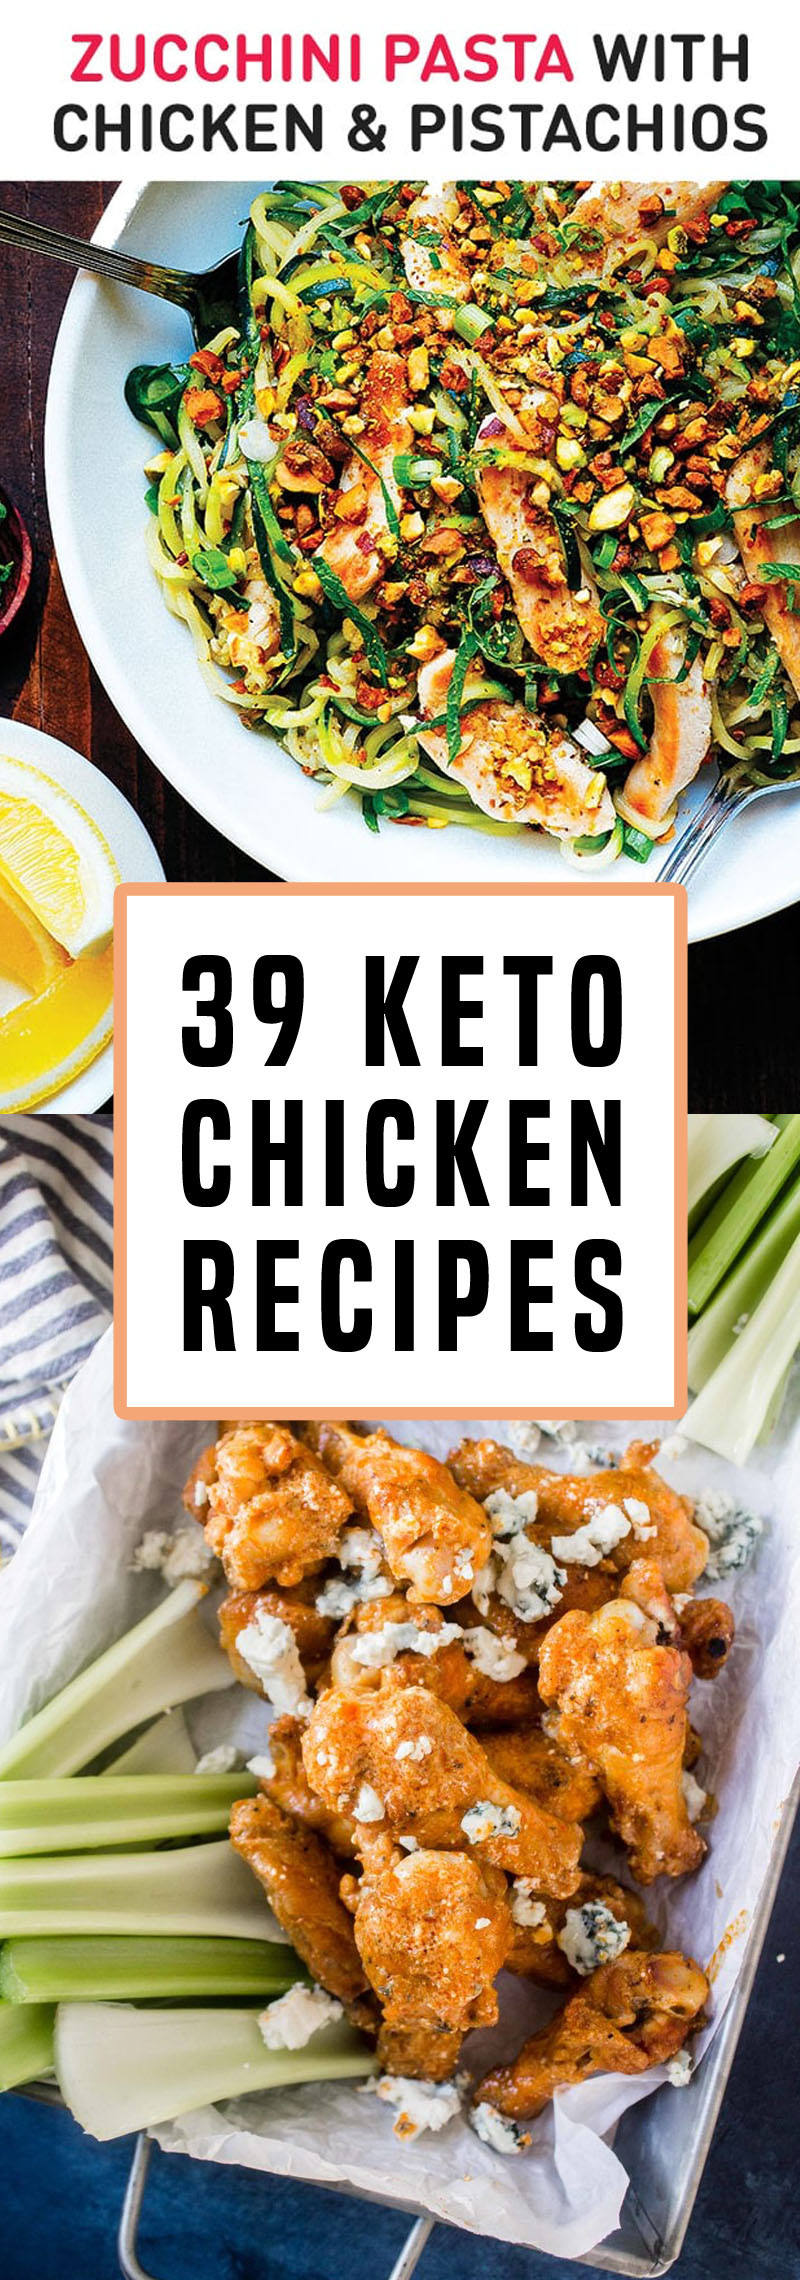 Canned Chicken Keto
 39 Keto Chicken Recipes That Are Super High Protein & Low